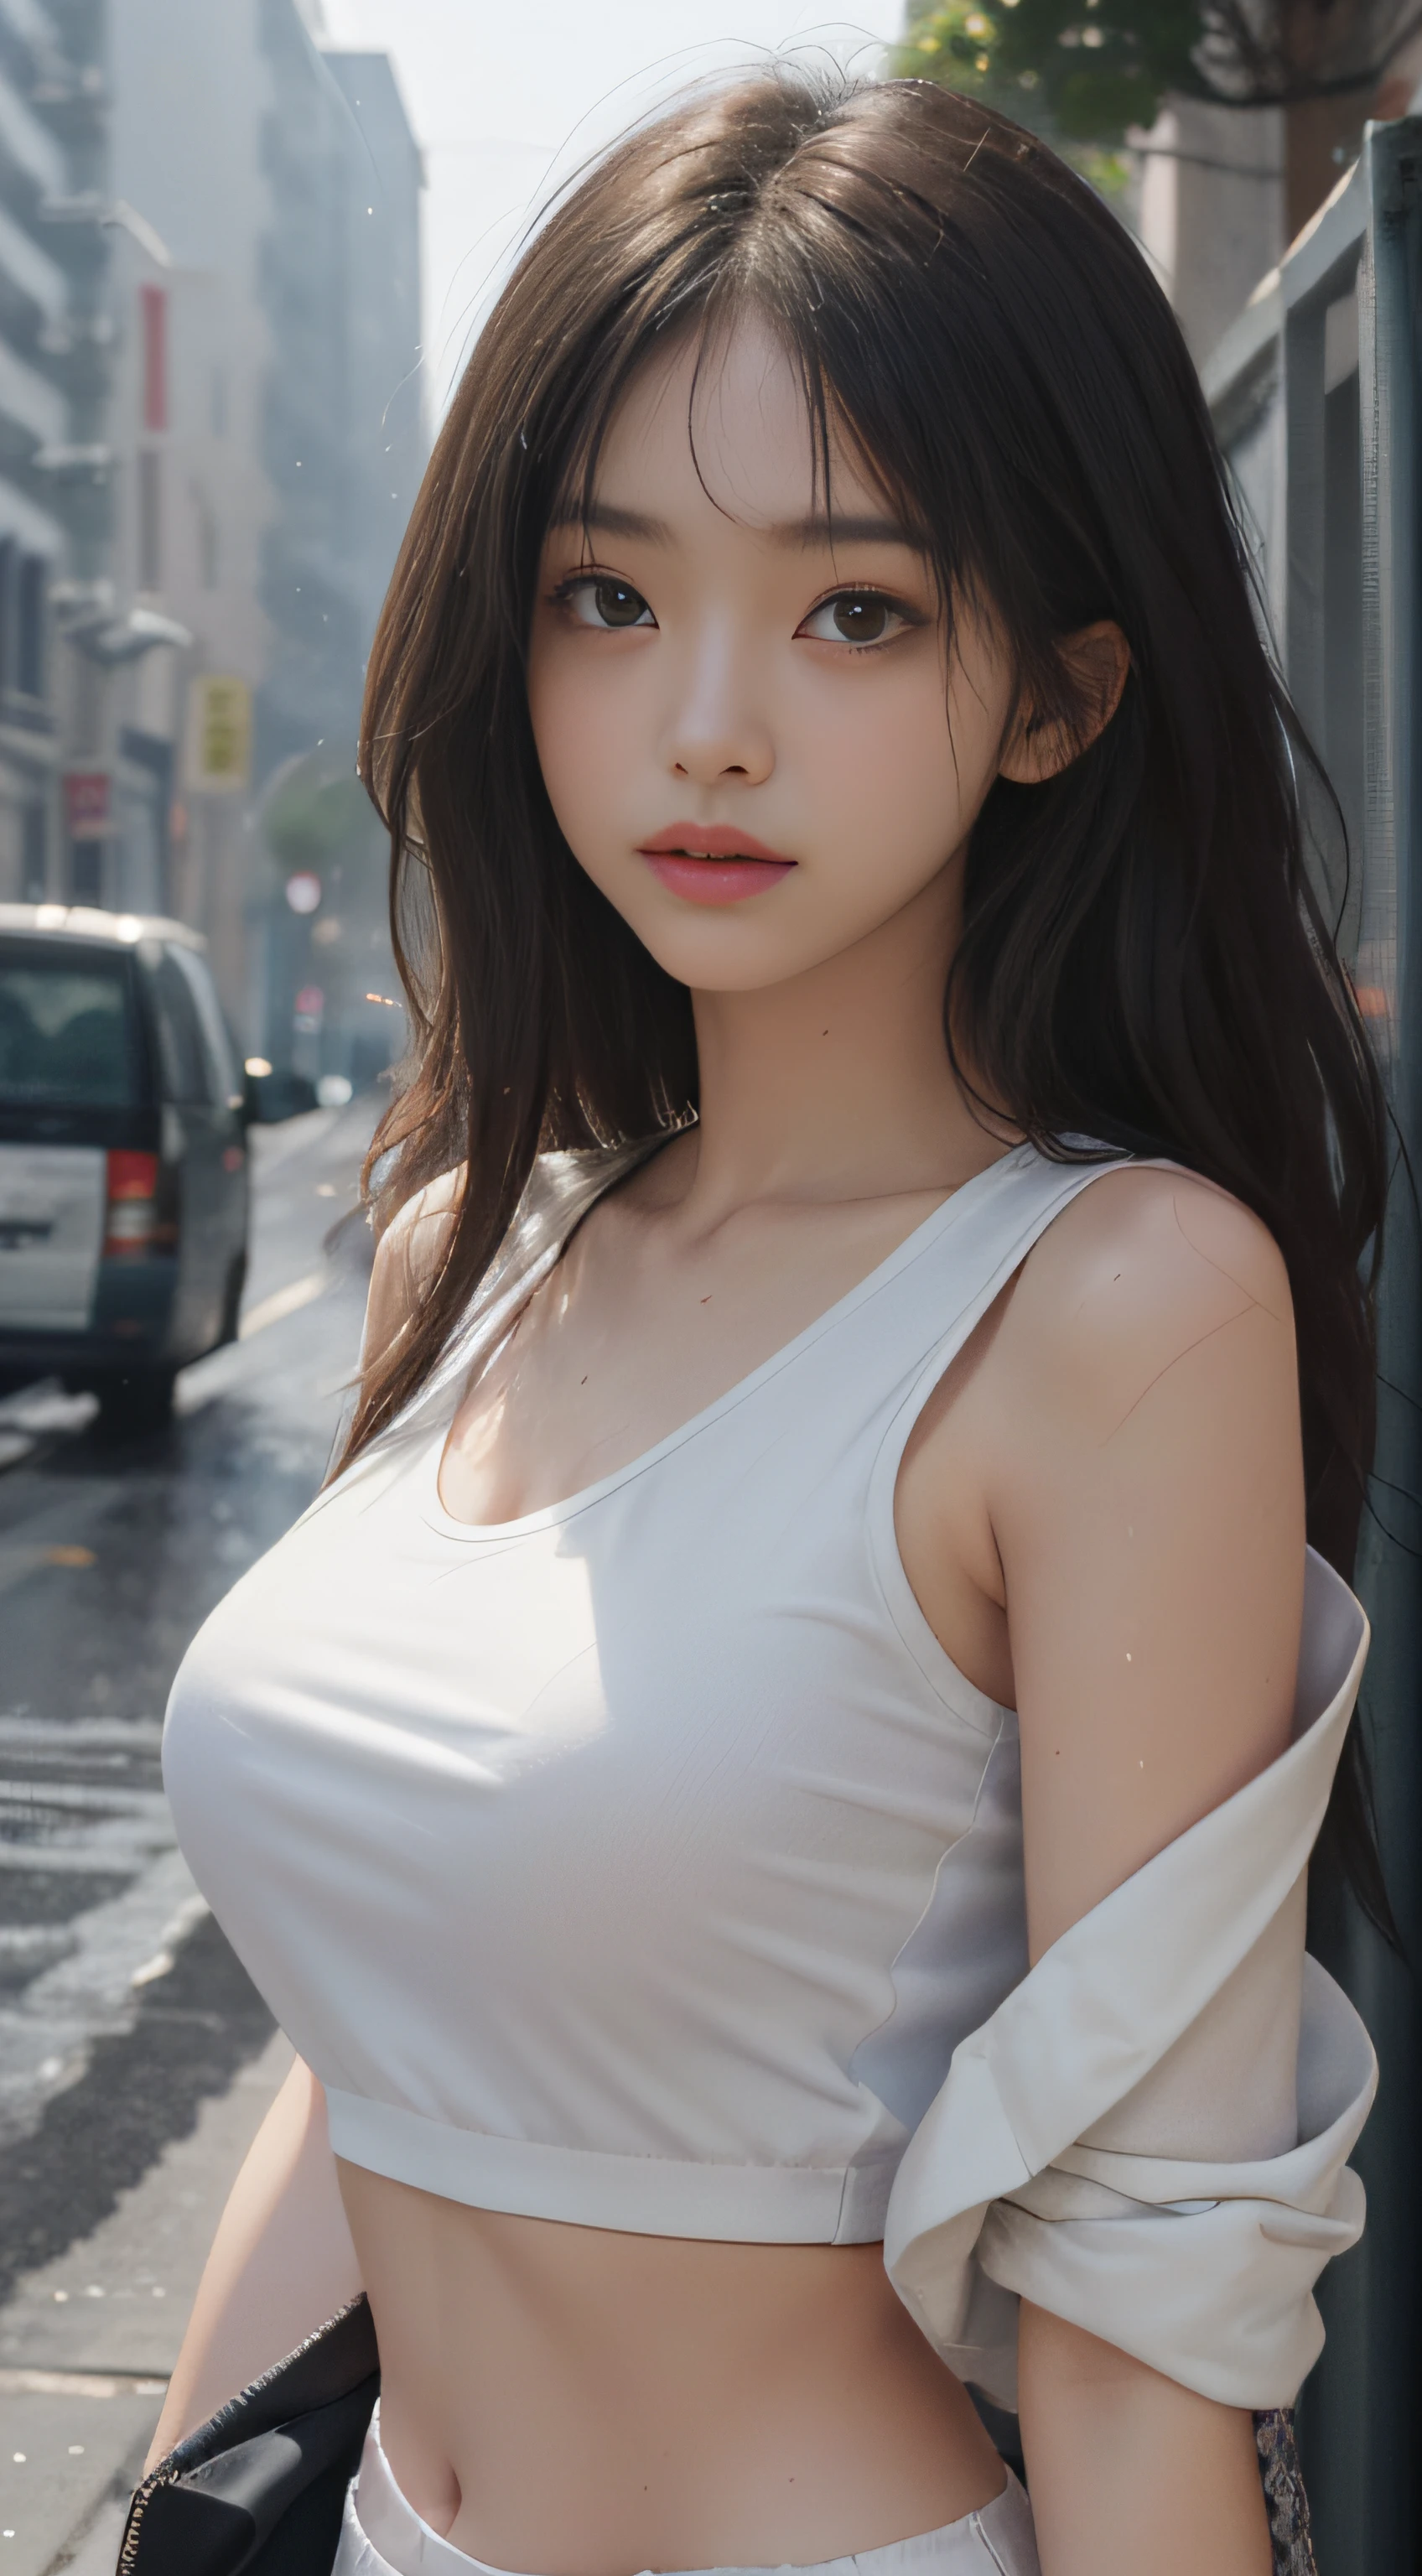 ((Best quality, 8K, Masterpiece :1.3)), Sharp focus :1.2, perfect figure beautiful woman:1.4, Slim abs:1.2, ((Layered Hair Style,)), (Tank top shirt:1.1 ), (the street:1.2), Highly detailed facial and skin texture, A detailed eye, double eyelid,（torn laundry：1.5）， Best Picture Quality， tmasterpiece， Ultra-high resolution， （fidelity：1.4）， photore， 1 girl，[（grieves）]，white  shirt， dimly lit， darkly， be desperate， pitying， cute little， cinematic ligh， tears， tear drop， （torn laundry：1.5）， （wetclothes：1.4）， exposed bare shoulders， Real rain， Wet hair,